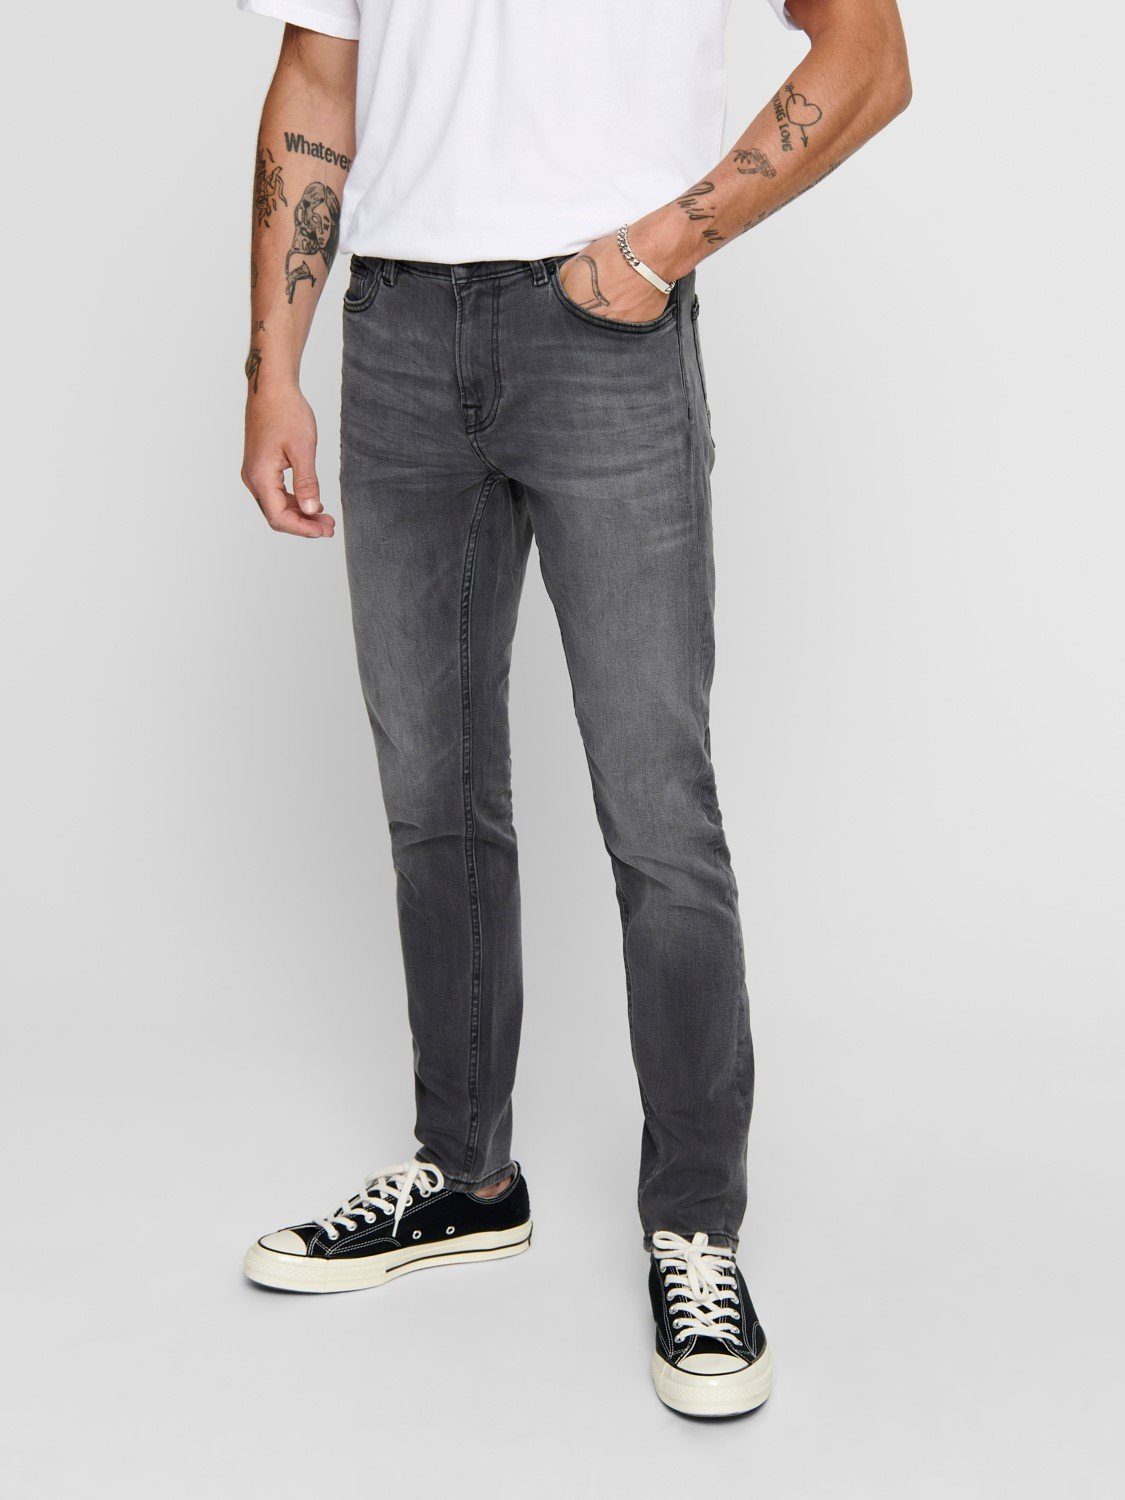 Fit ONSWARP & Jeans Grau Basic Pants Hose in 3977 Slim-fit-Jeans Denim Washed SONS (1-tlg) Stoned ONLY Skinny